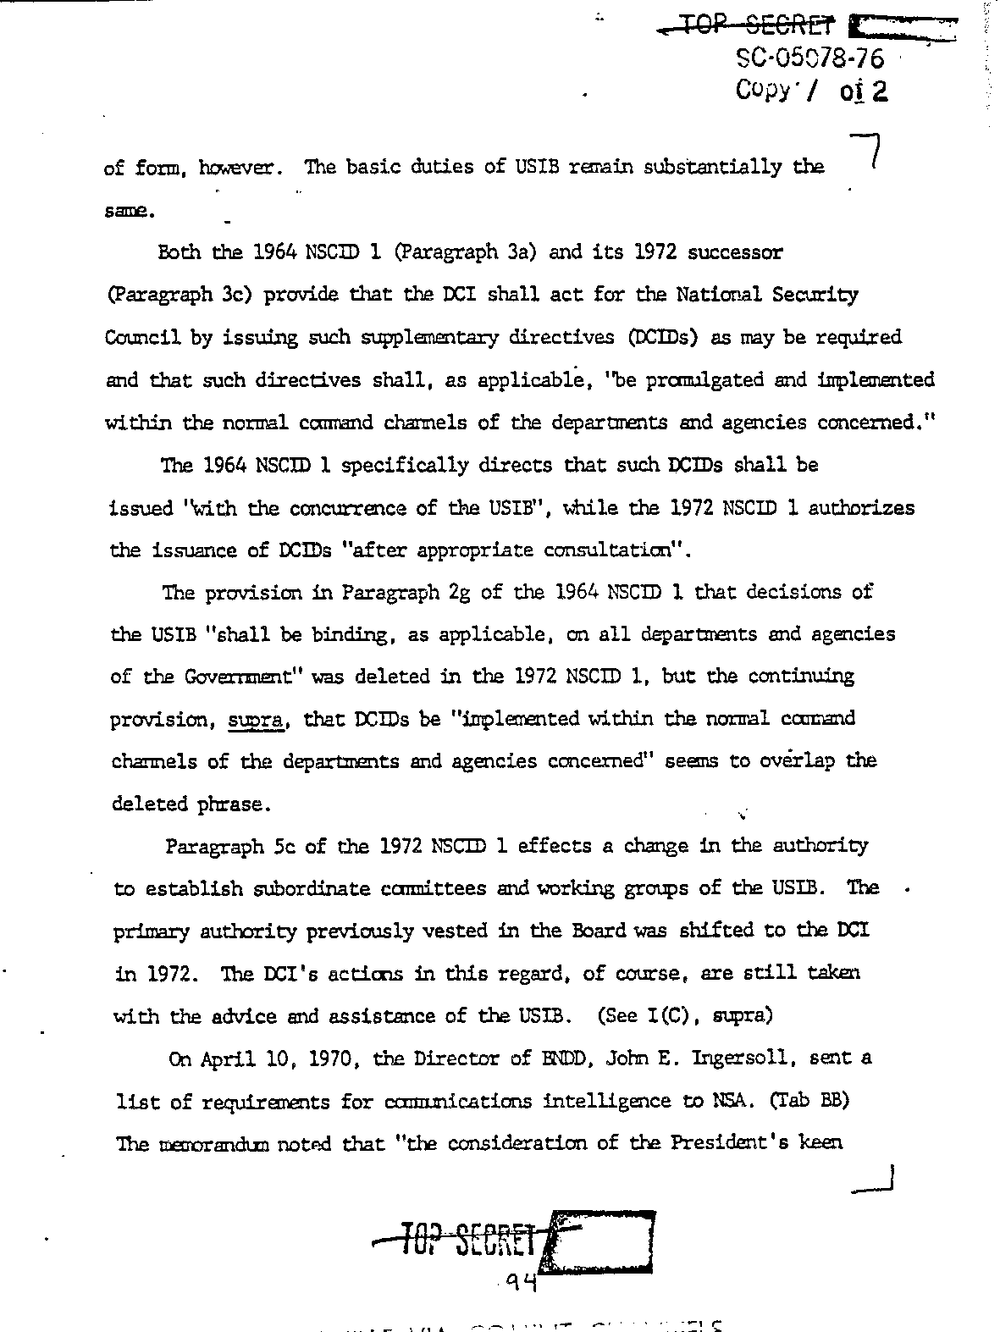 Page 102 from Report on Inquiry Into CIA Related Electronic Surveillance Activities